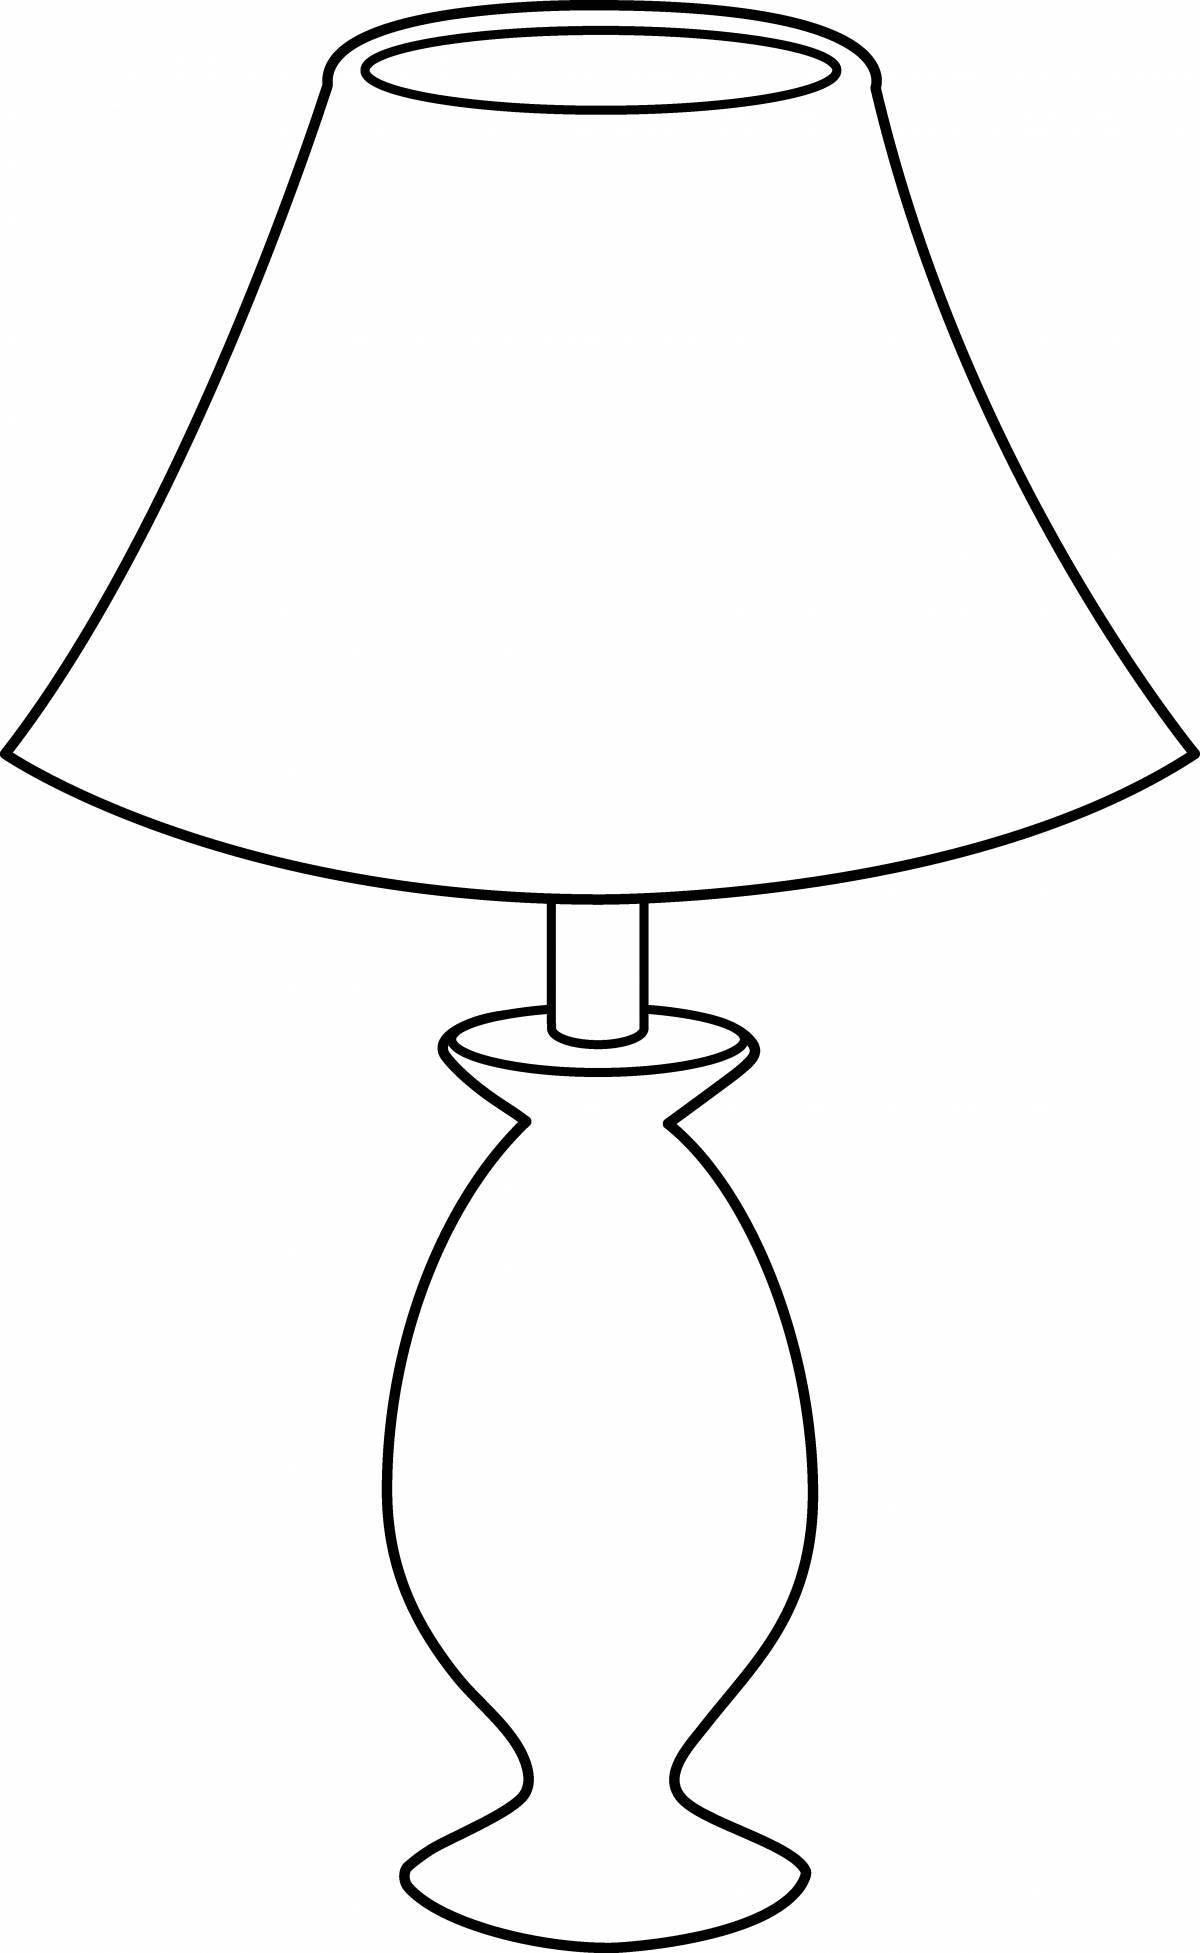 Night light coloring page